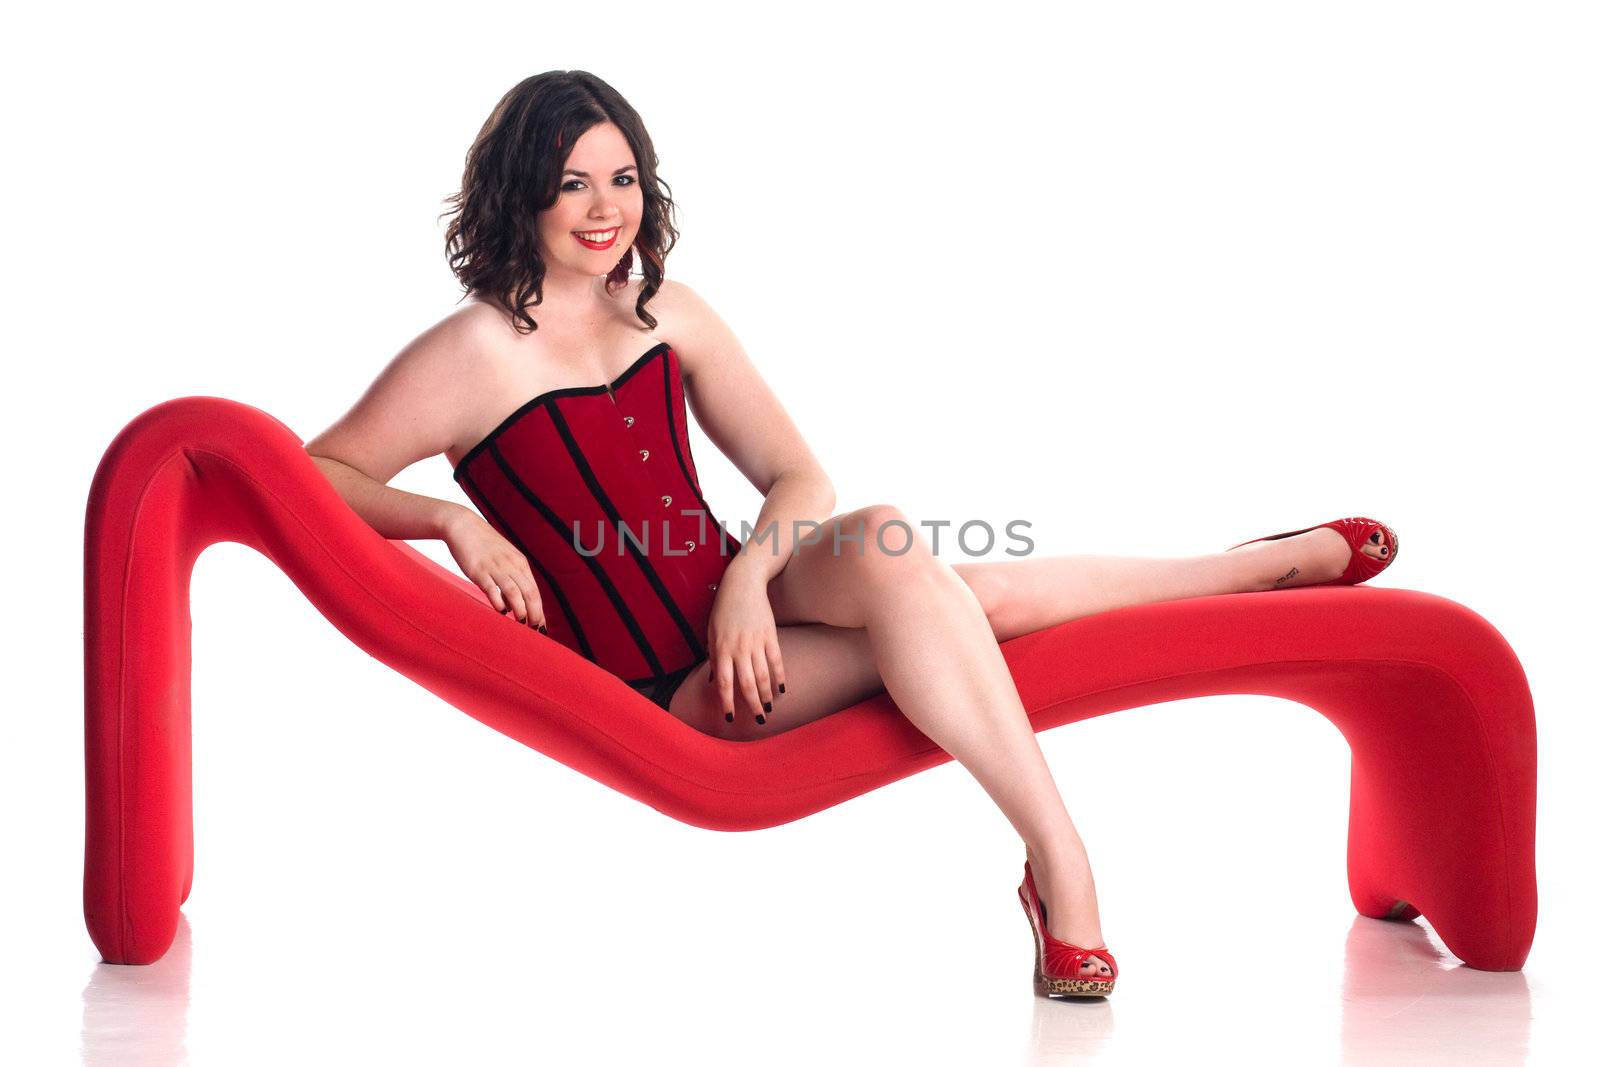 Cute girl in pin-up pose on retro red couch